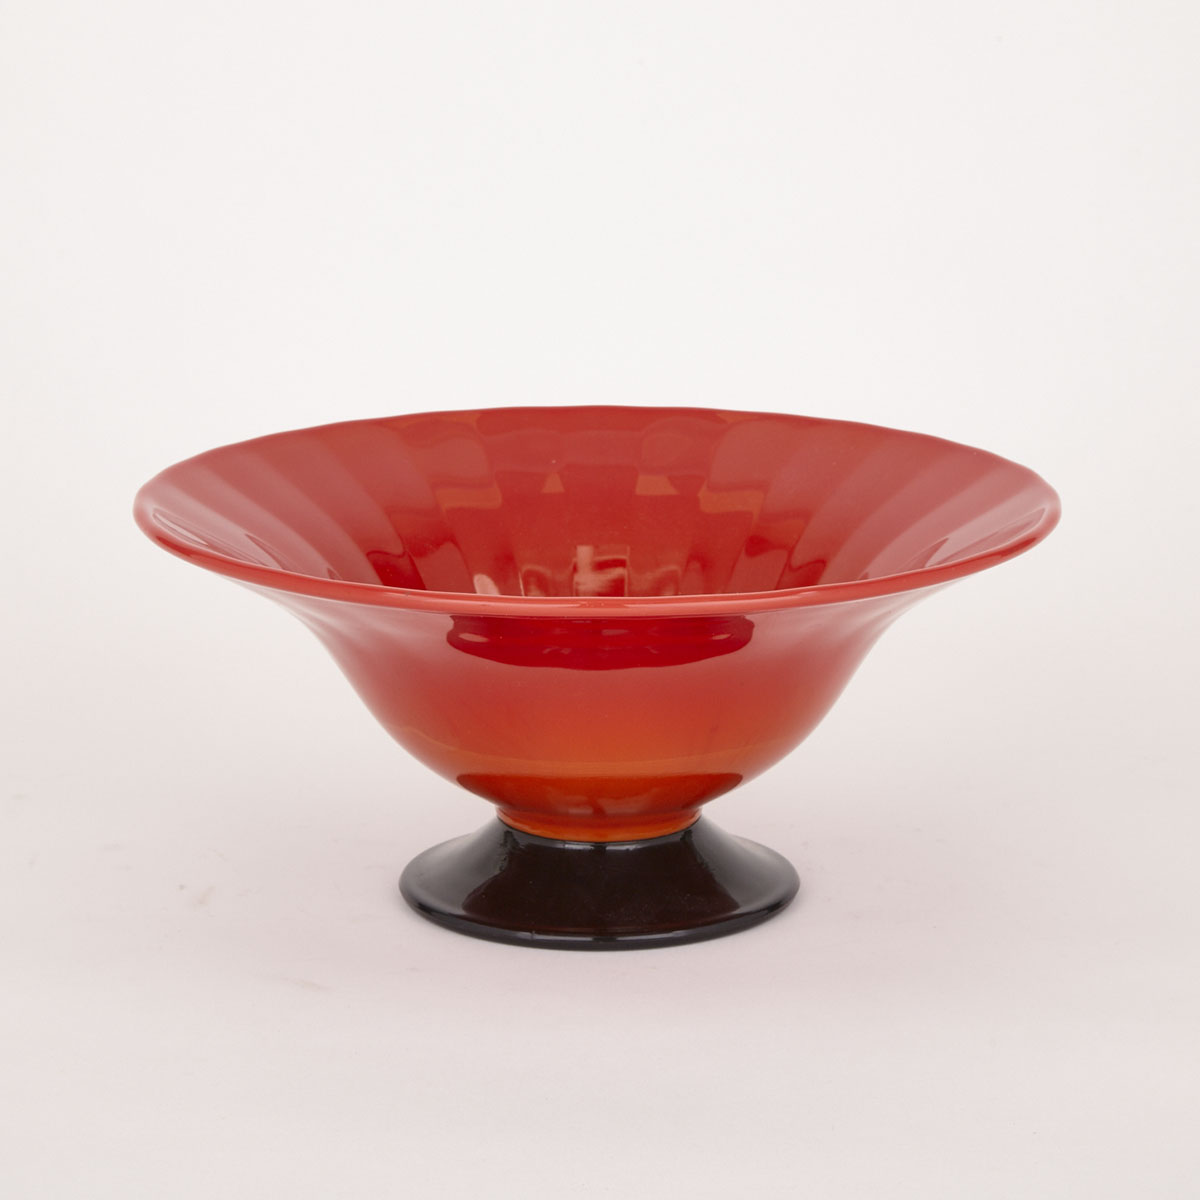 Art Deco Opaque Glass Comport, early-mid 20th century